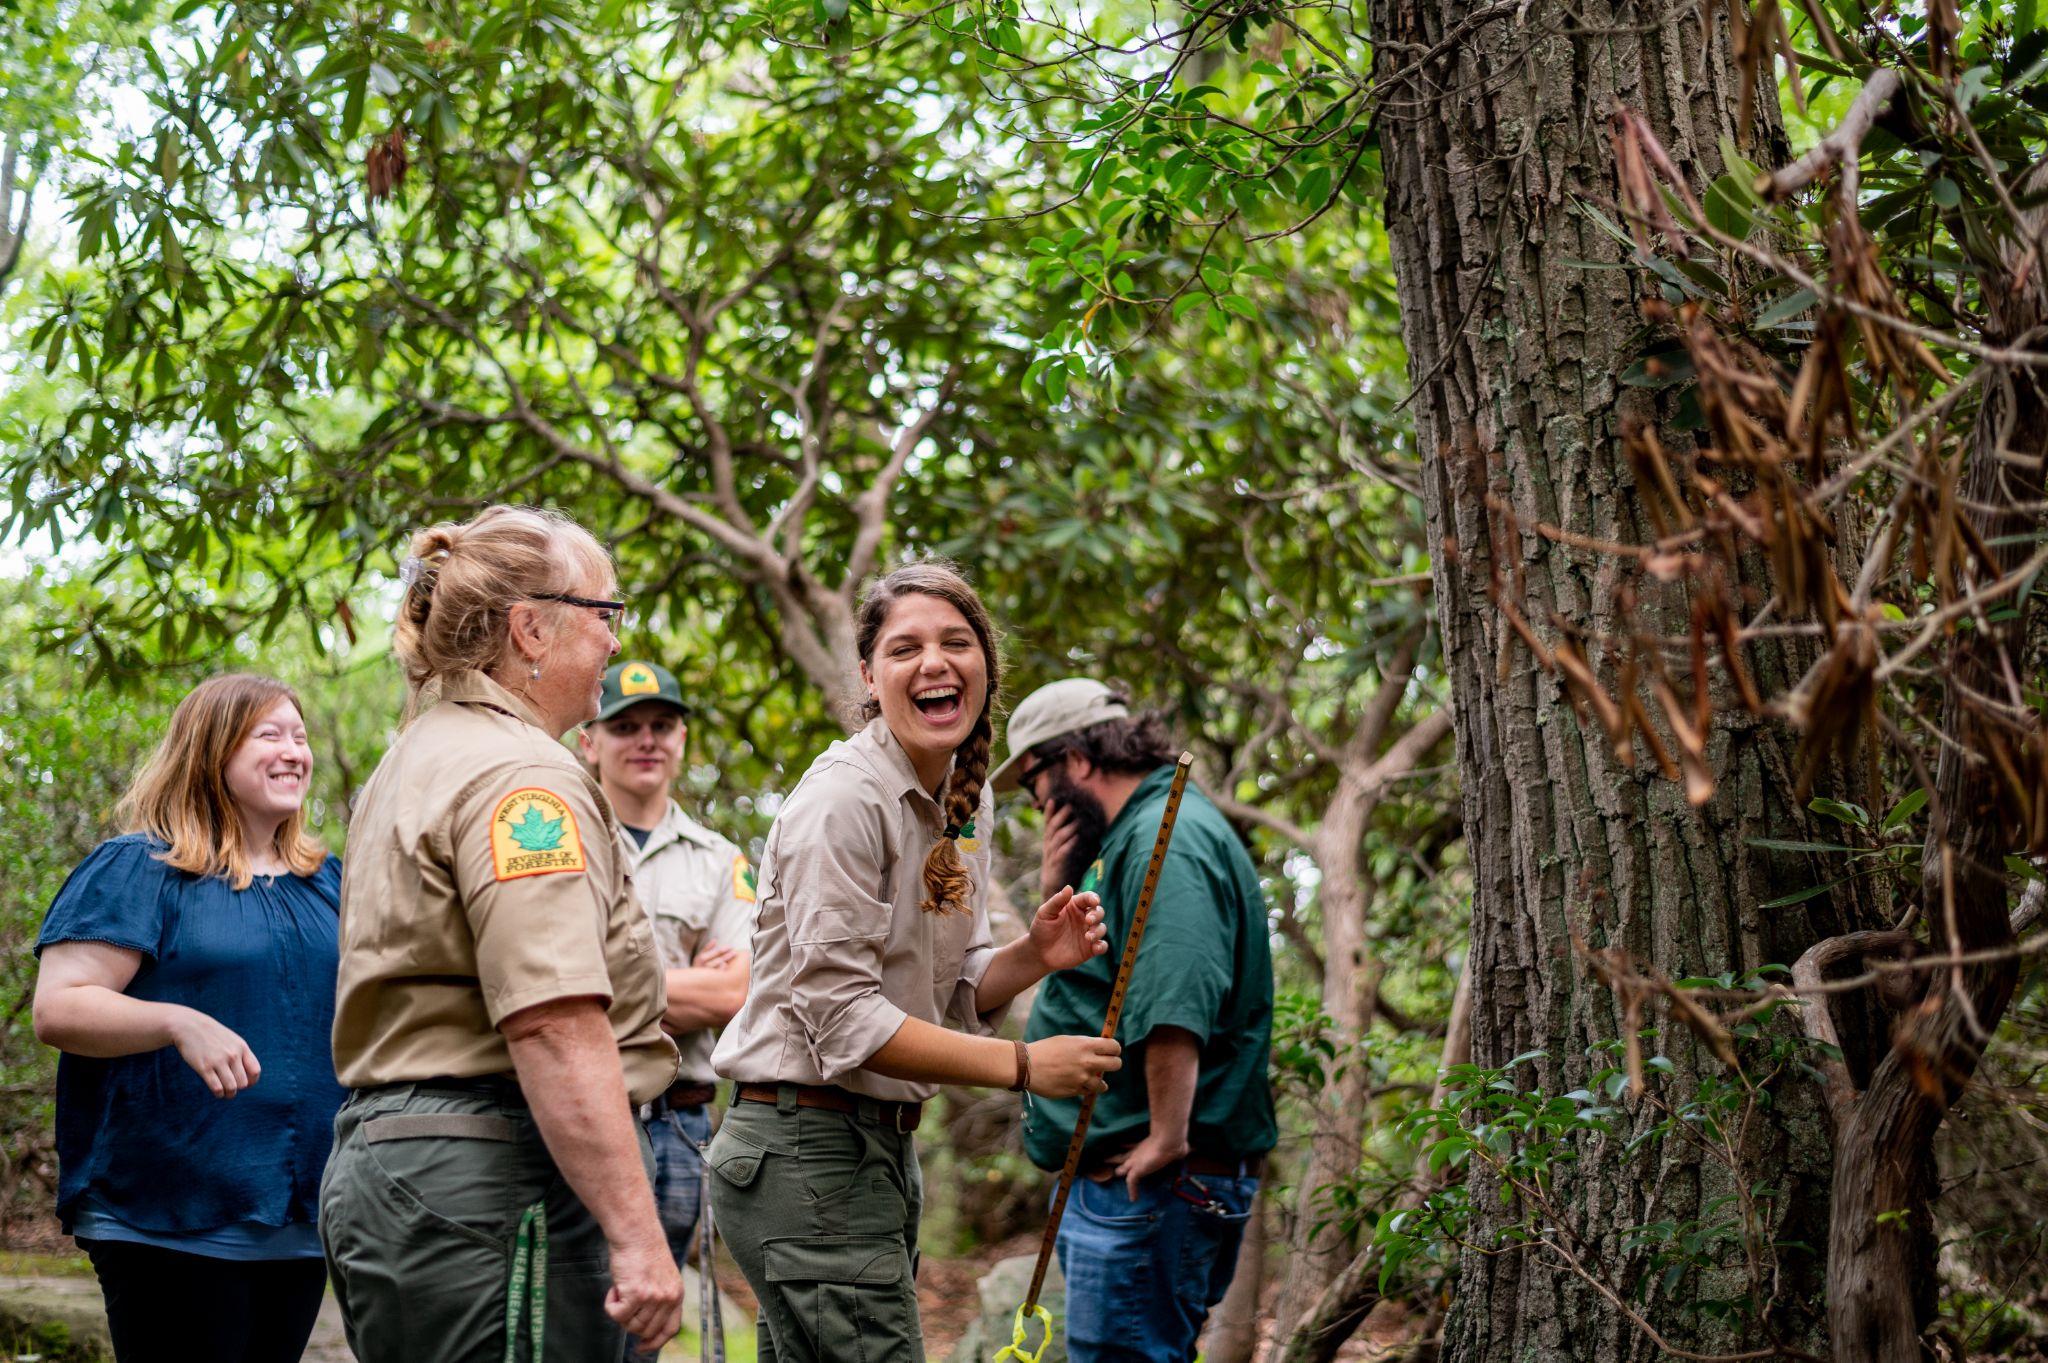 Working in nature starts here: Division of Forestry Internship Program